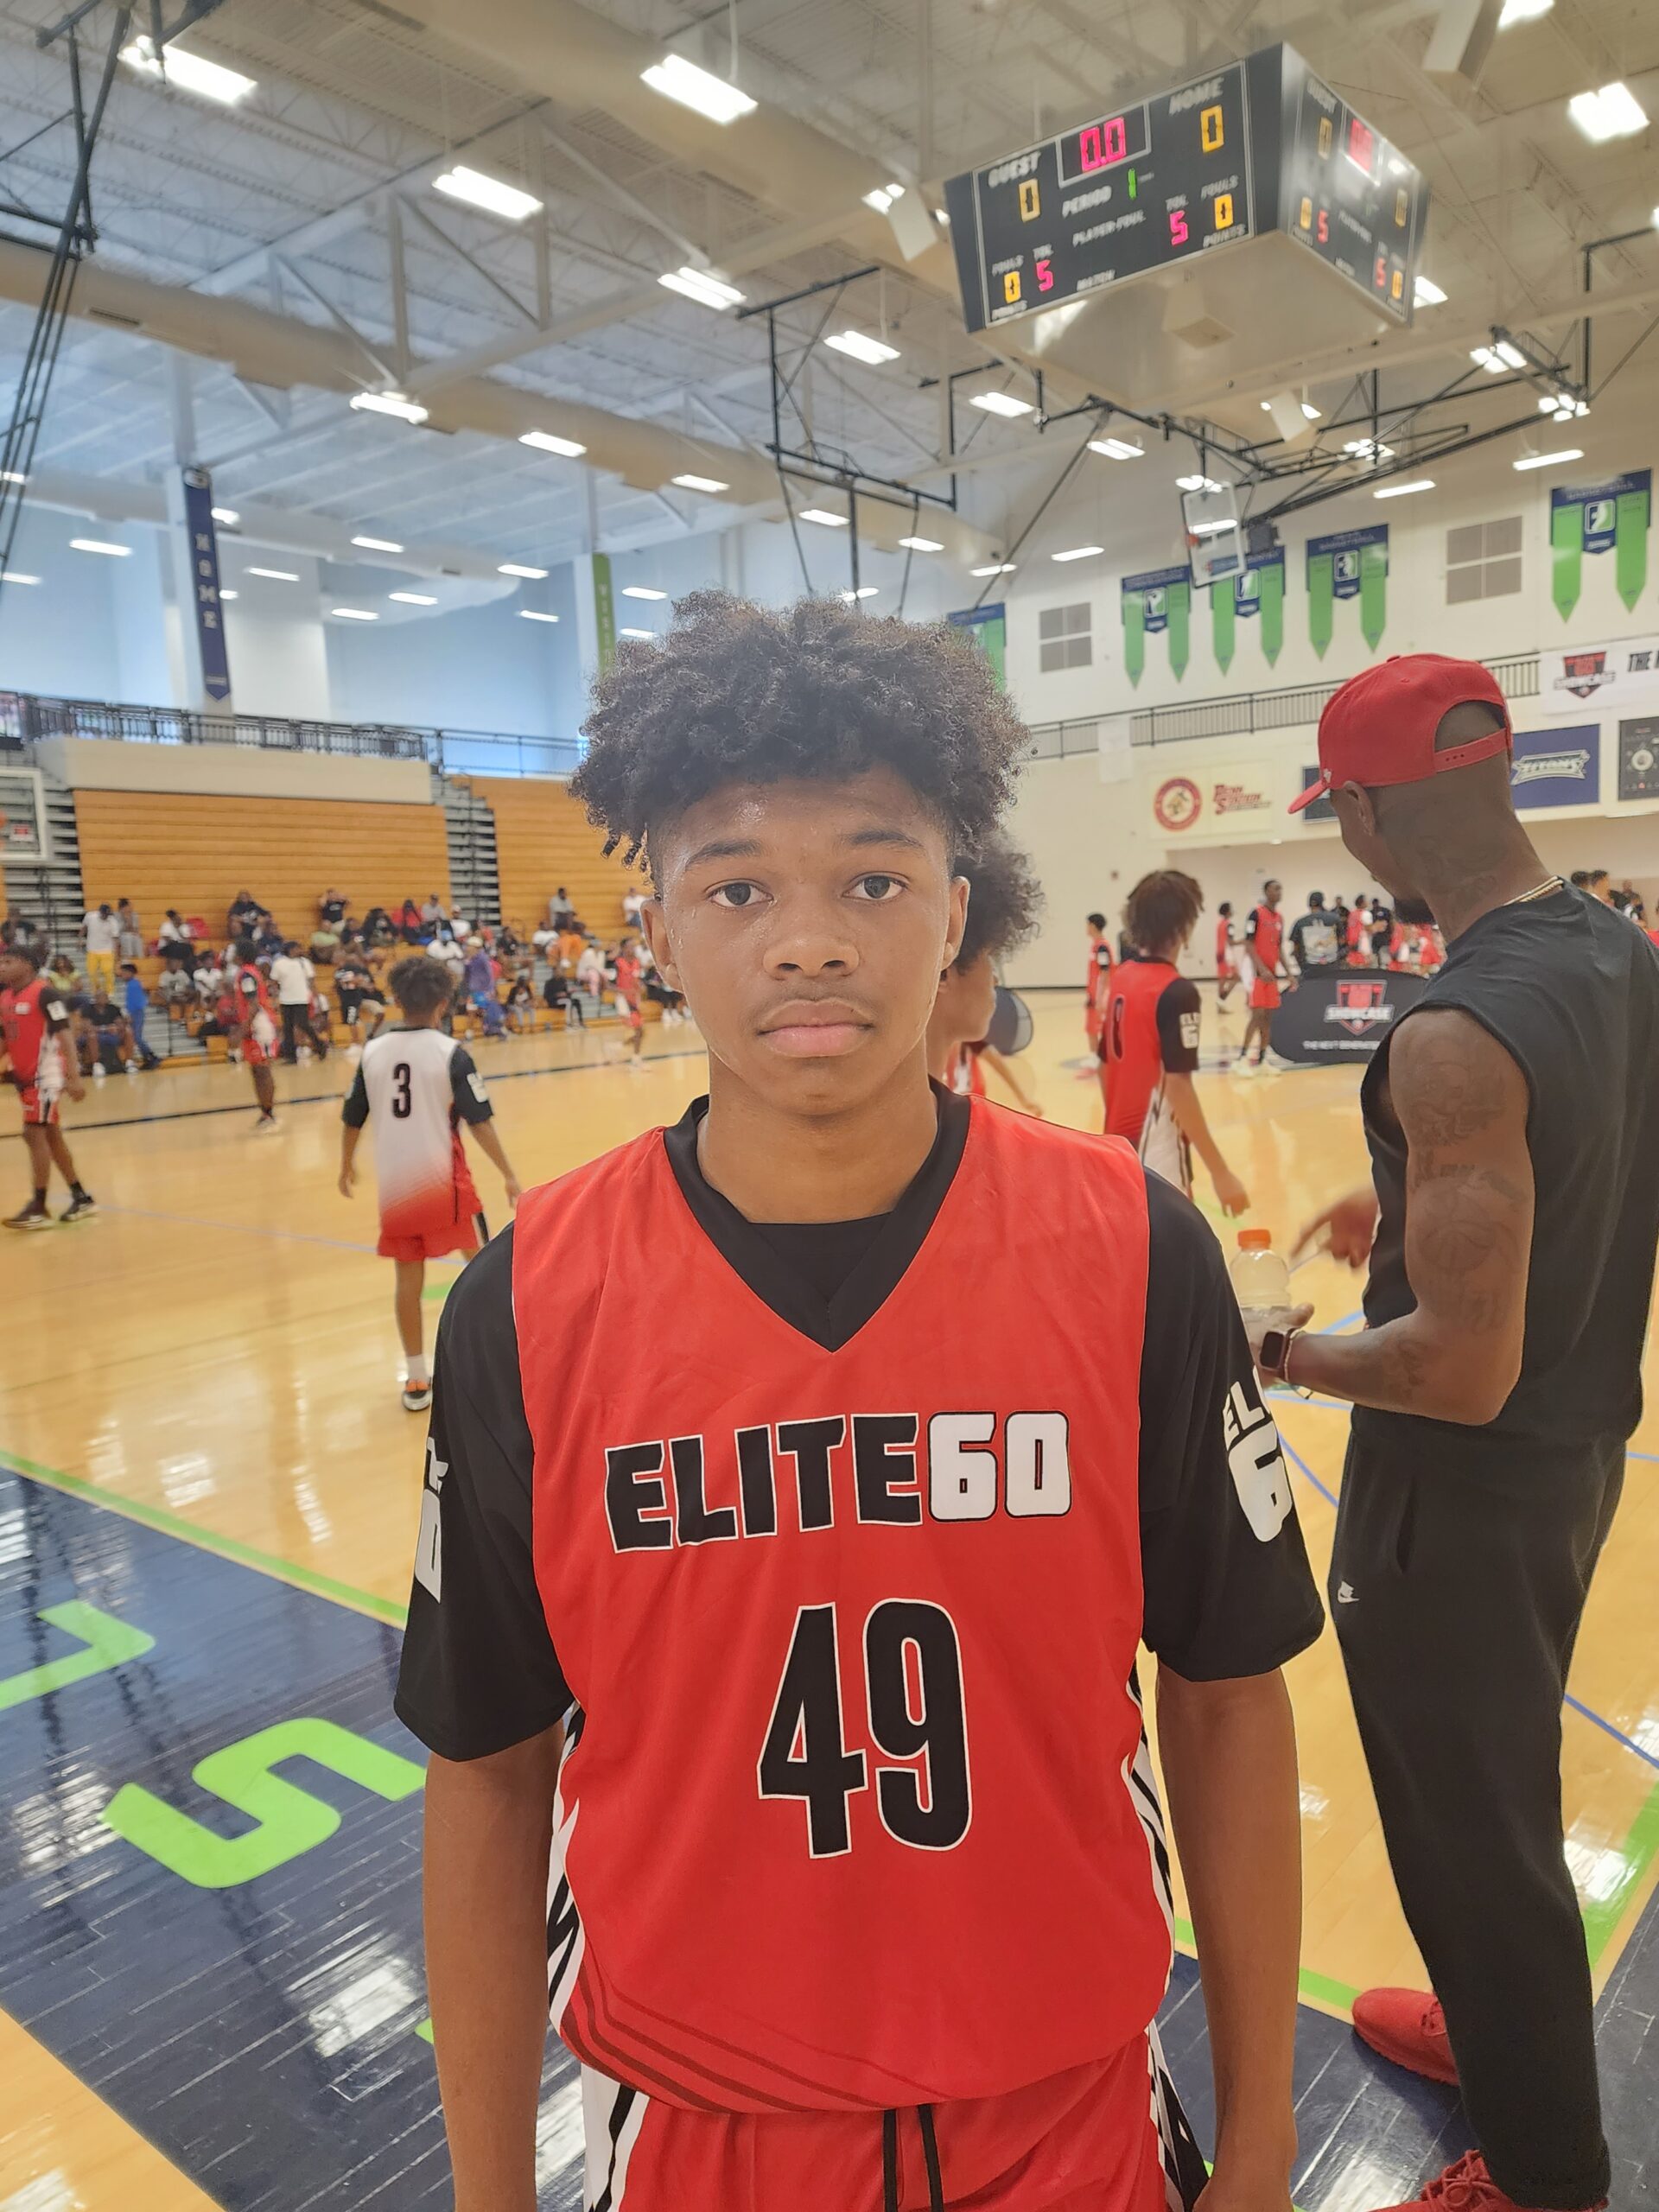 NGS Elite 60 Middle School Camp - Names to Know